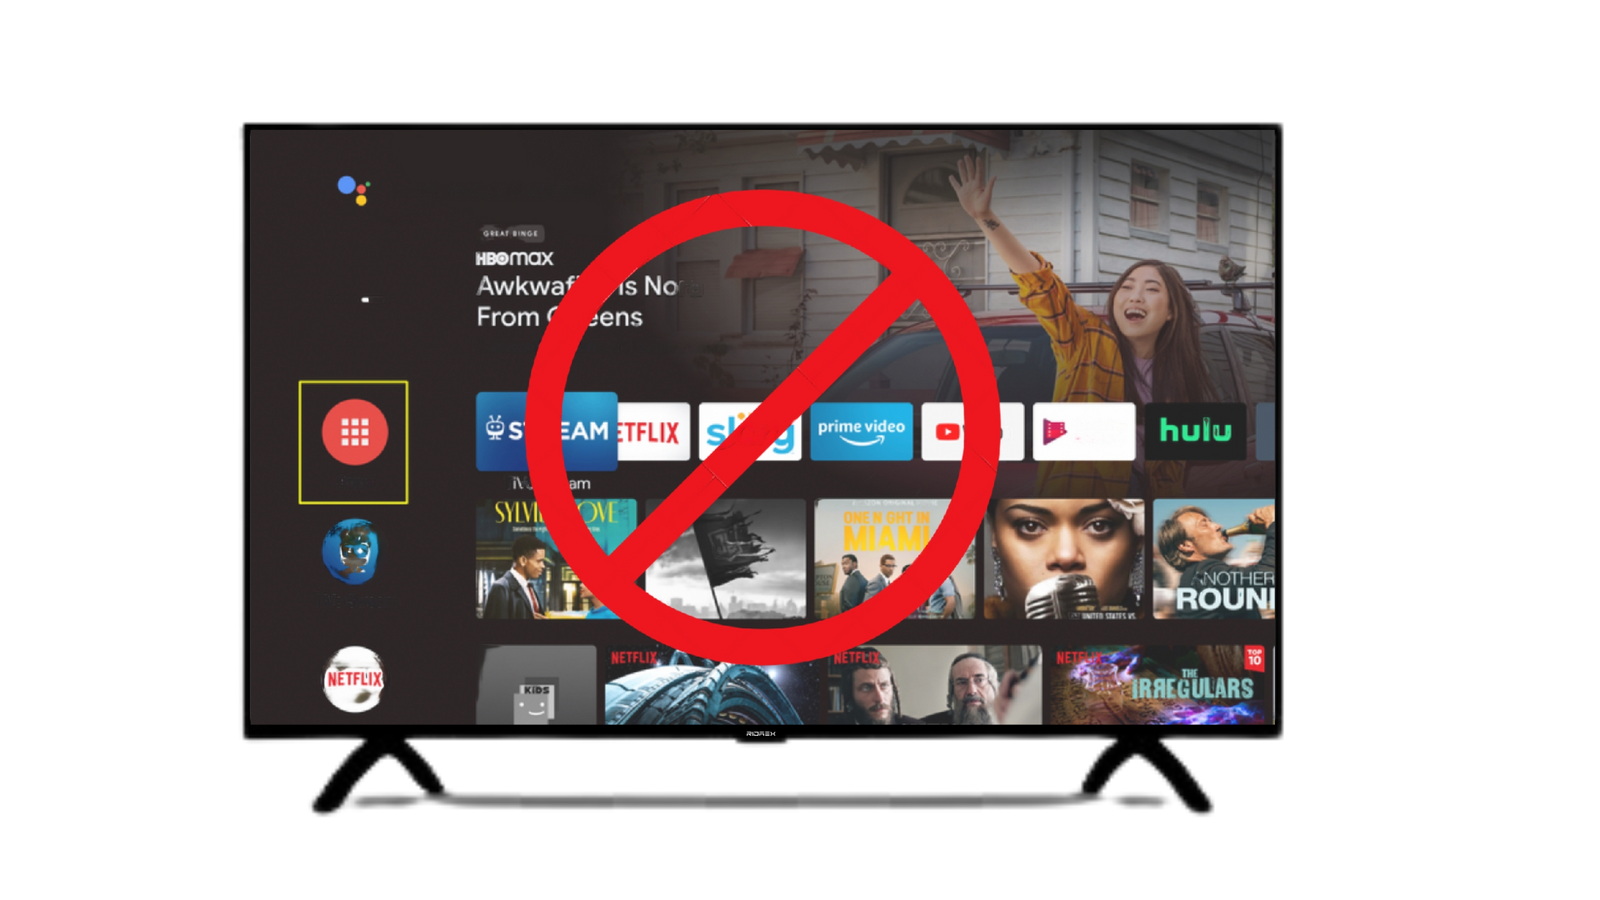 How to know if a downloaded application in your Smart TV is having problems and ways to fix them.